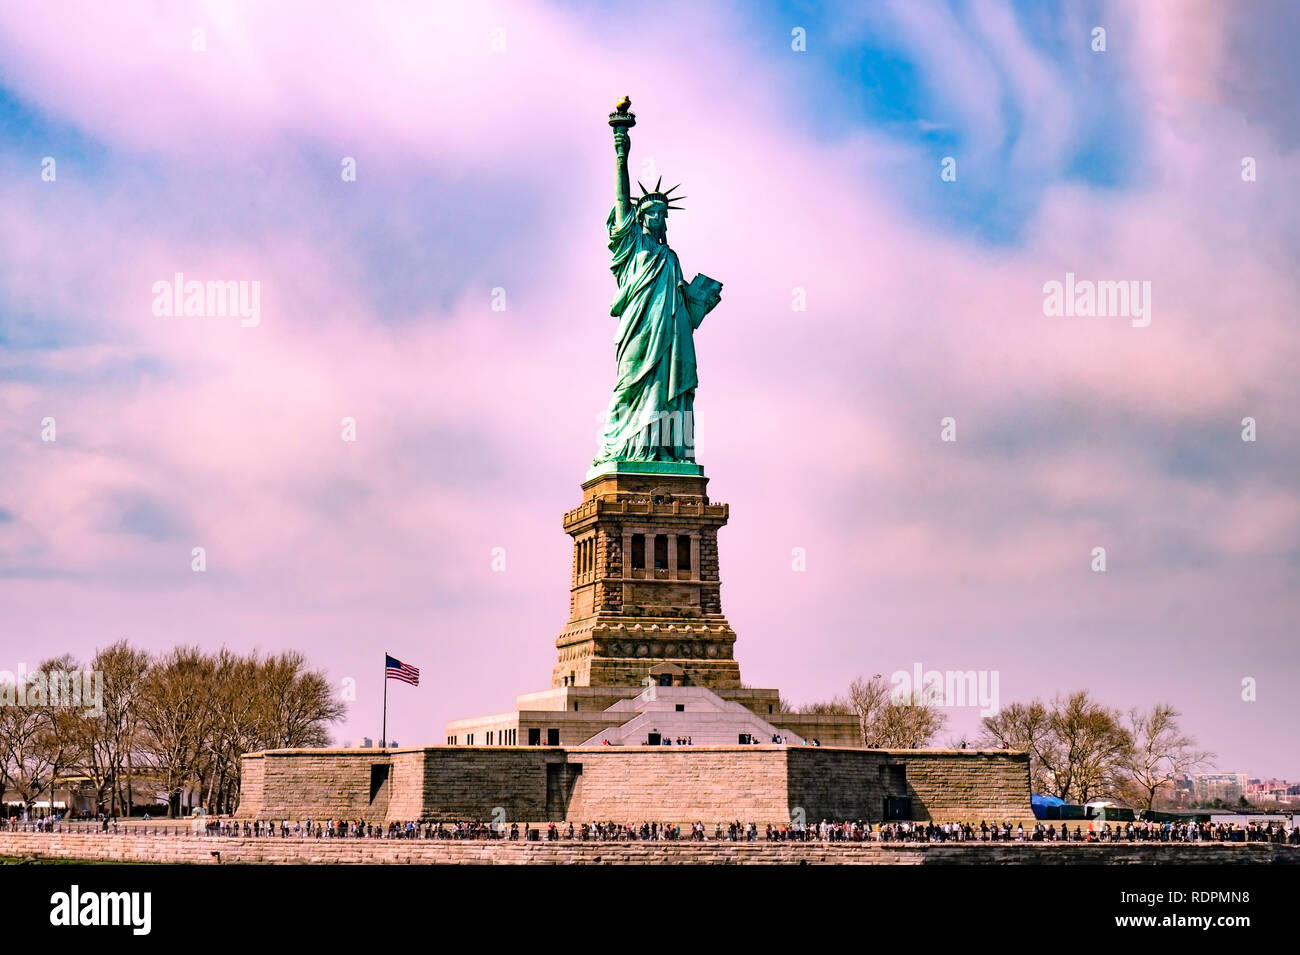 Statue of liberty in the middle with many tourists around it with pinky cloudy sky before sunset Stock Photo